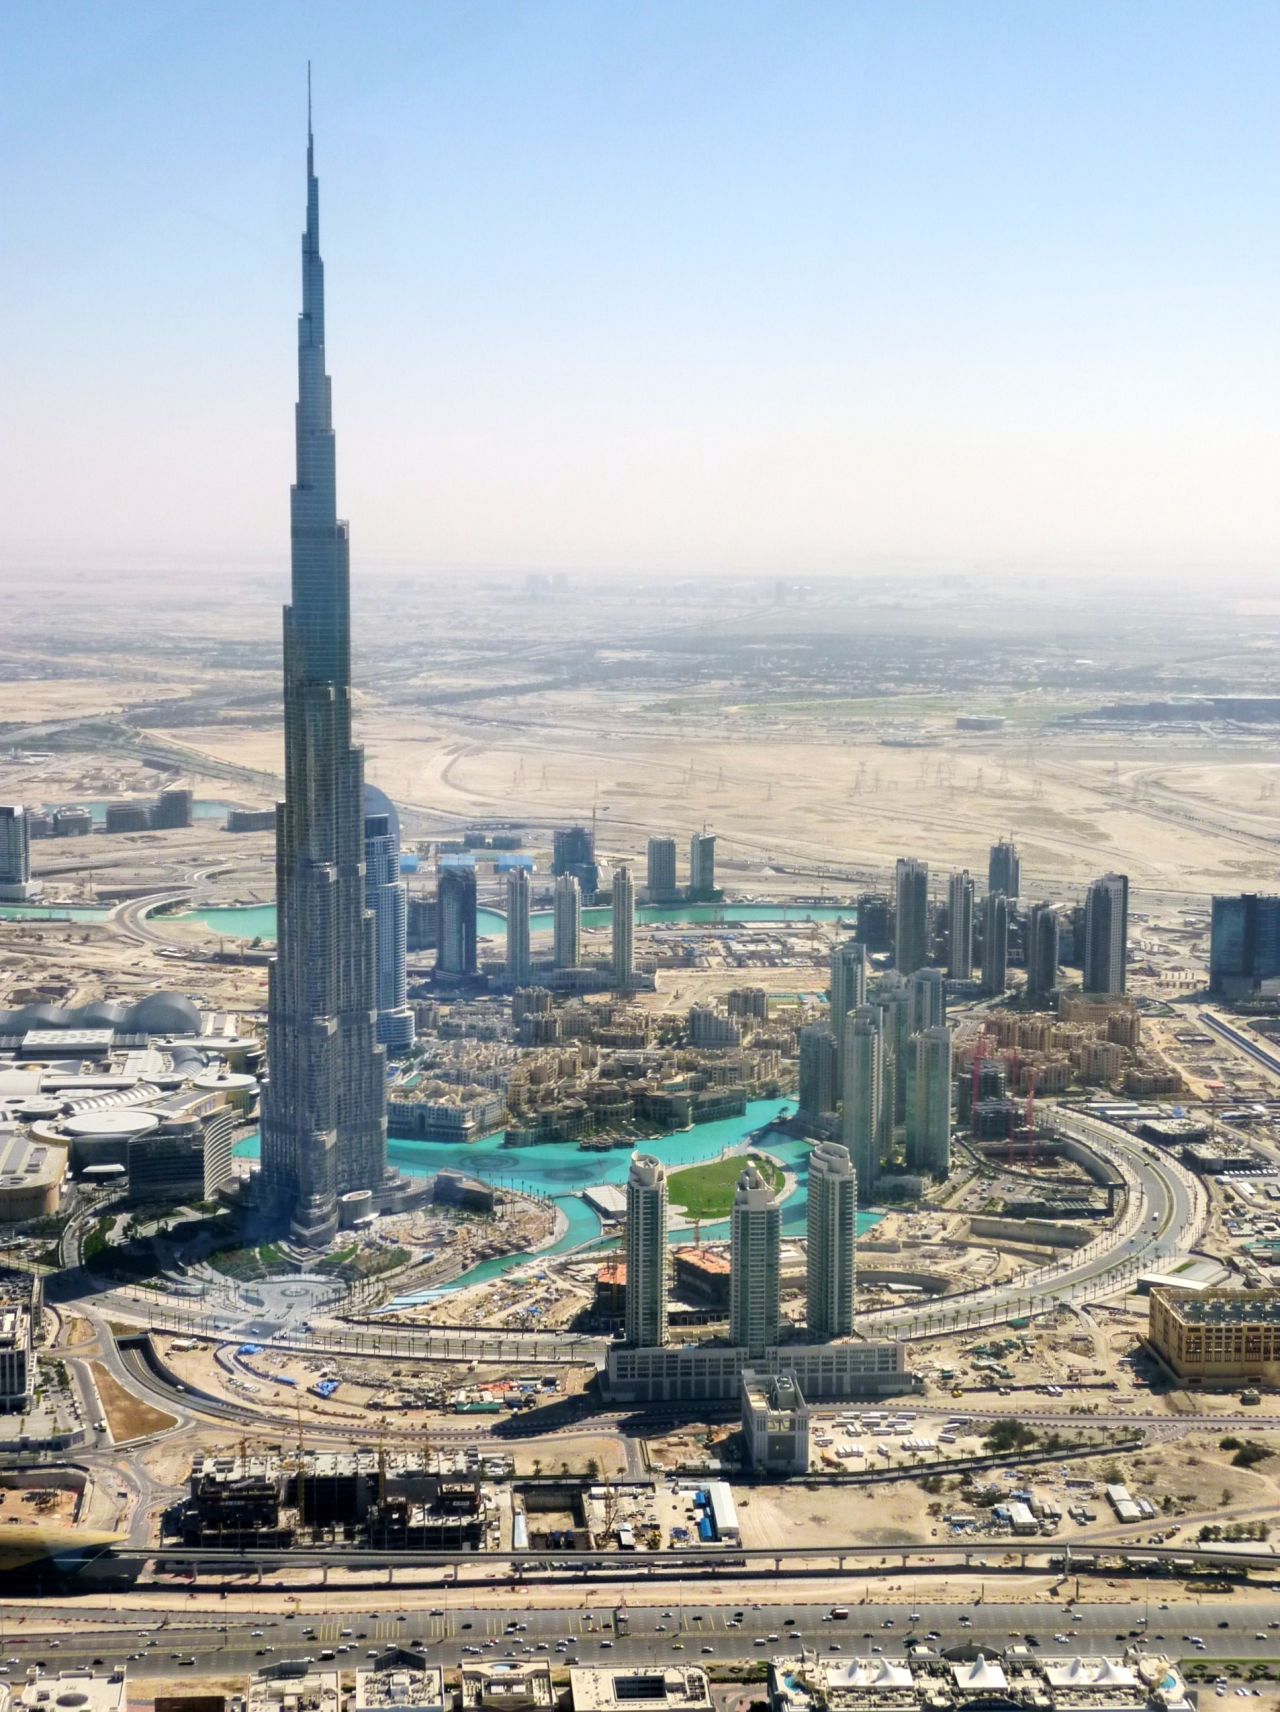 This is just the tip of <a href="http://ireport.cnn.com/docs/DOC-1129273">Burj Khalifa</a>, which is the tallest man-made structure in the world, standing at 2,722 feet. It has set records for having the world's highest restaurant, elevator installation and even vertical concrete plumbing.